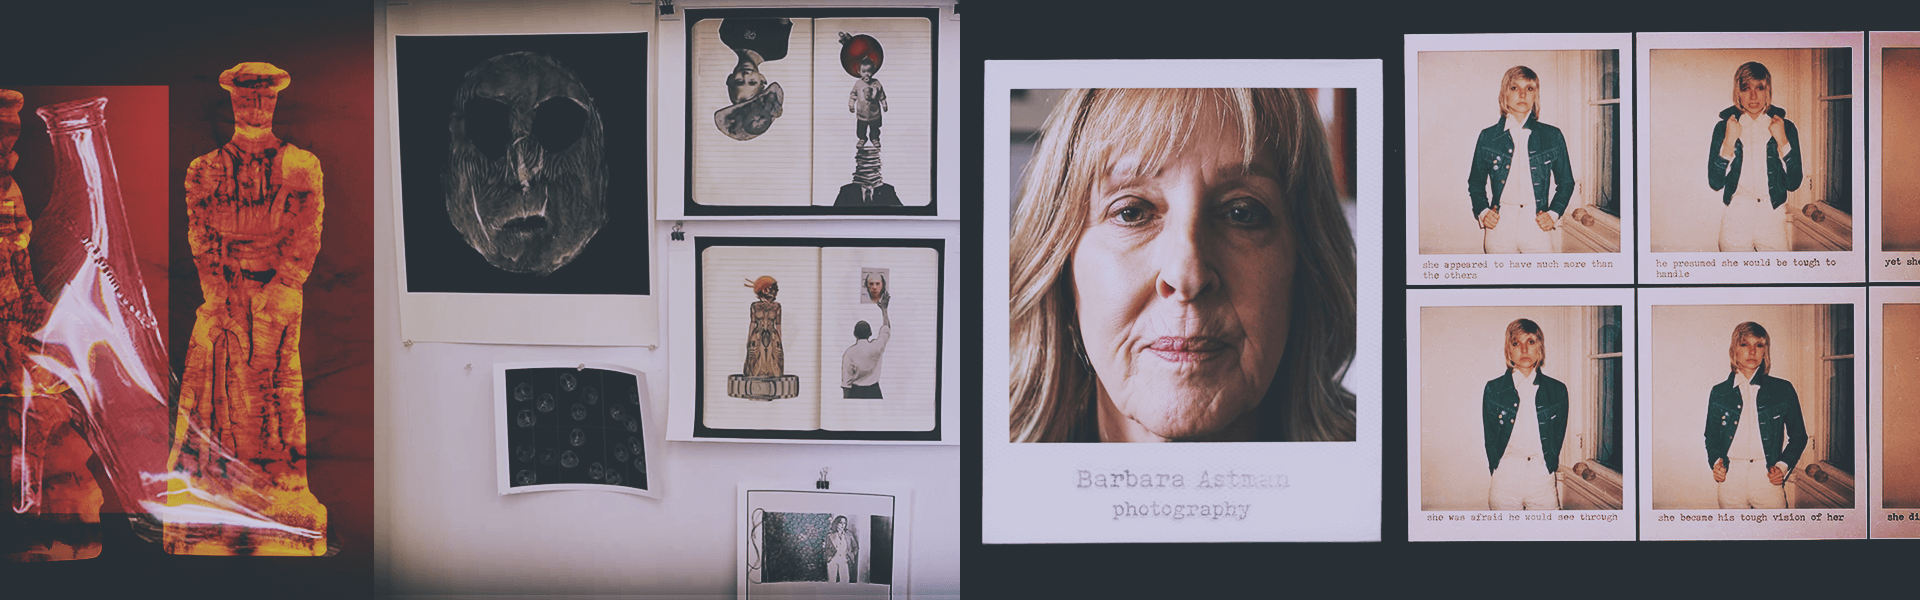 A triptych of various works of art on the left and in the middle, with portraits of Barbara Astman on the right.